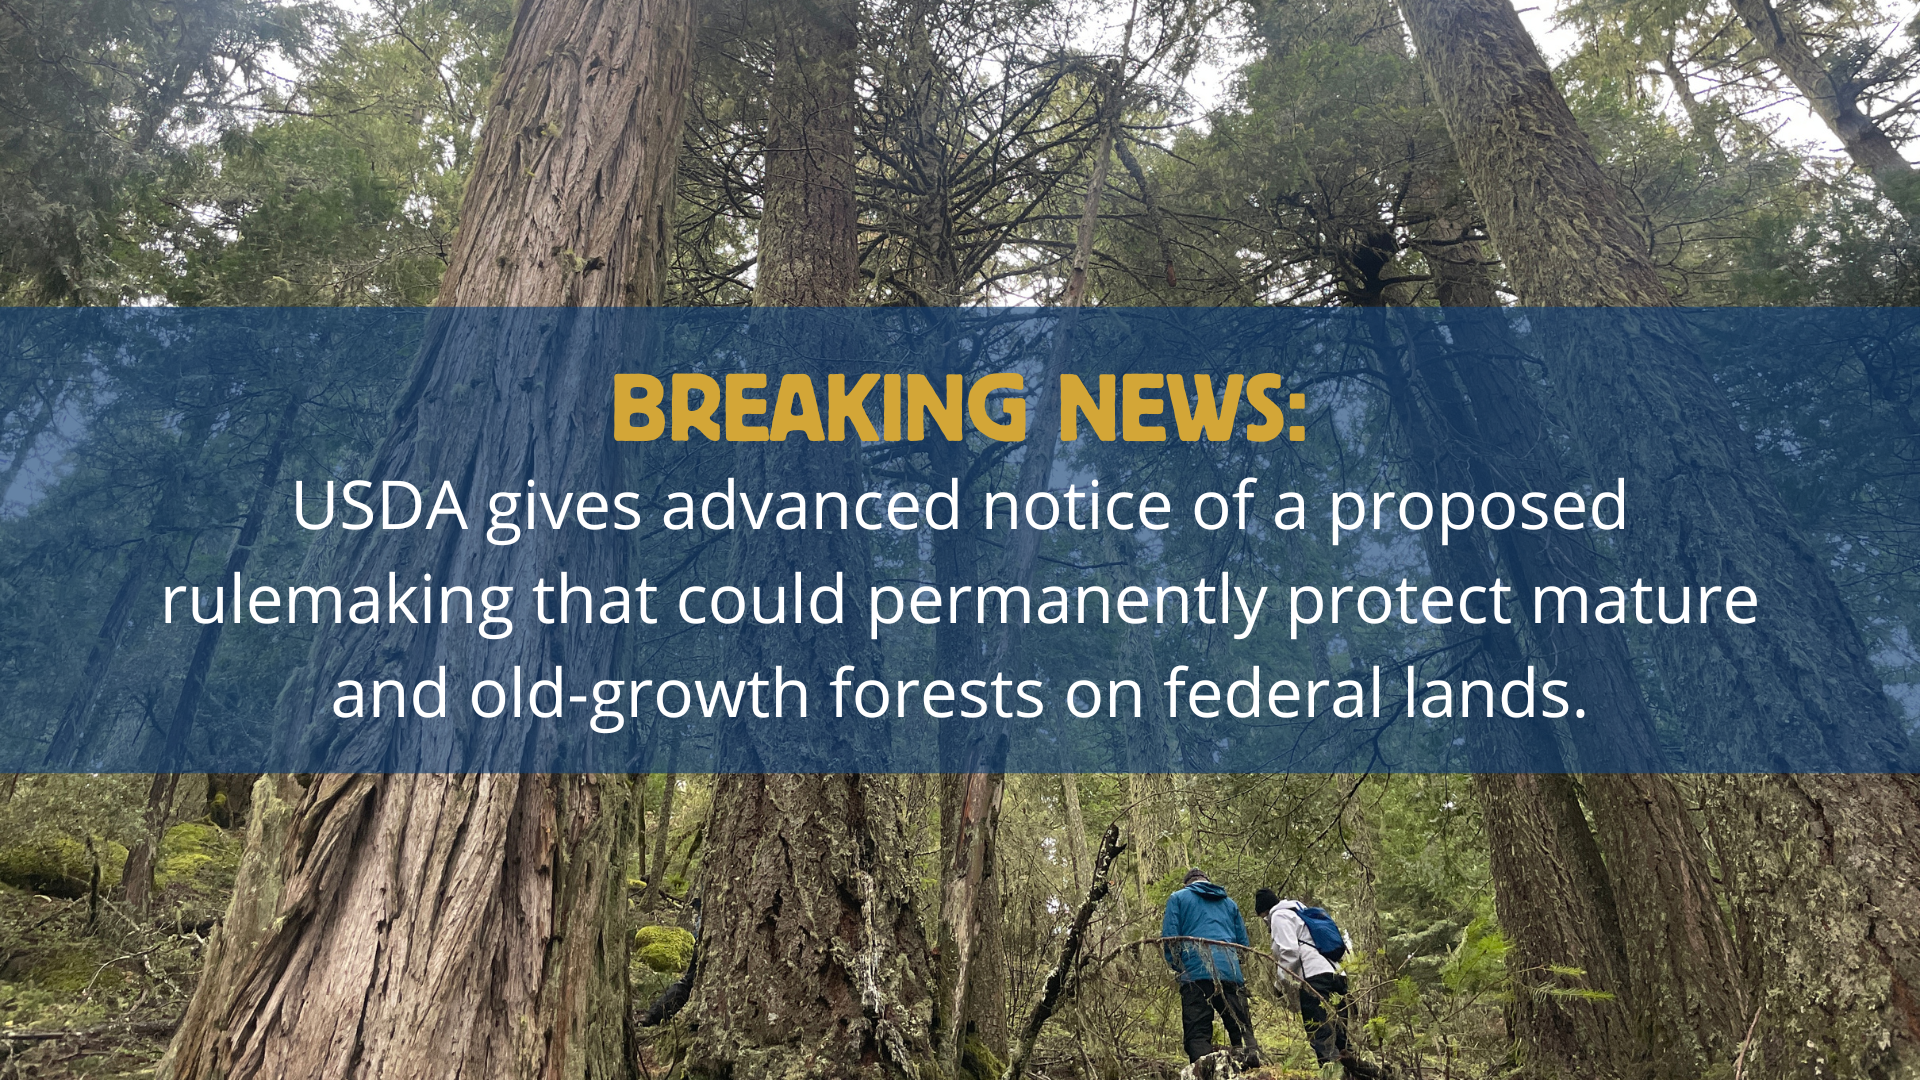 breaking news: USDA gives advanced notice of a proposed rulemaking that could permanently protect mature and old-growth forests on federal lands.